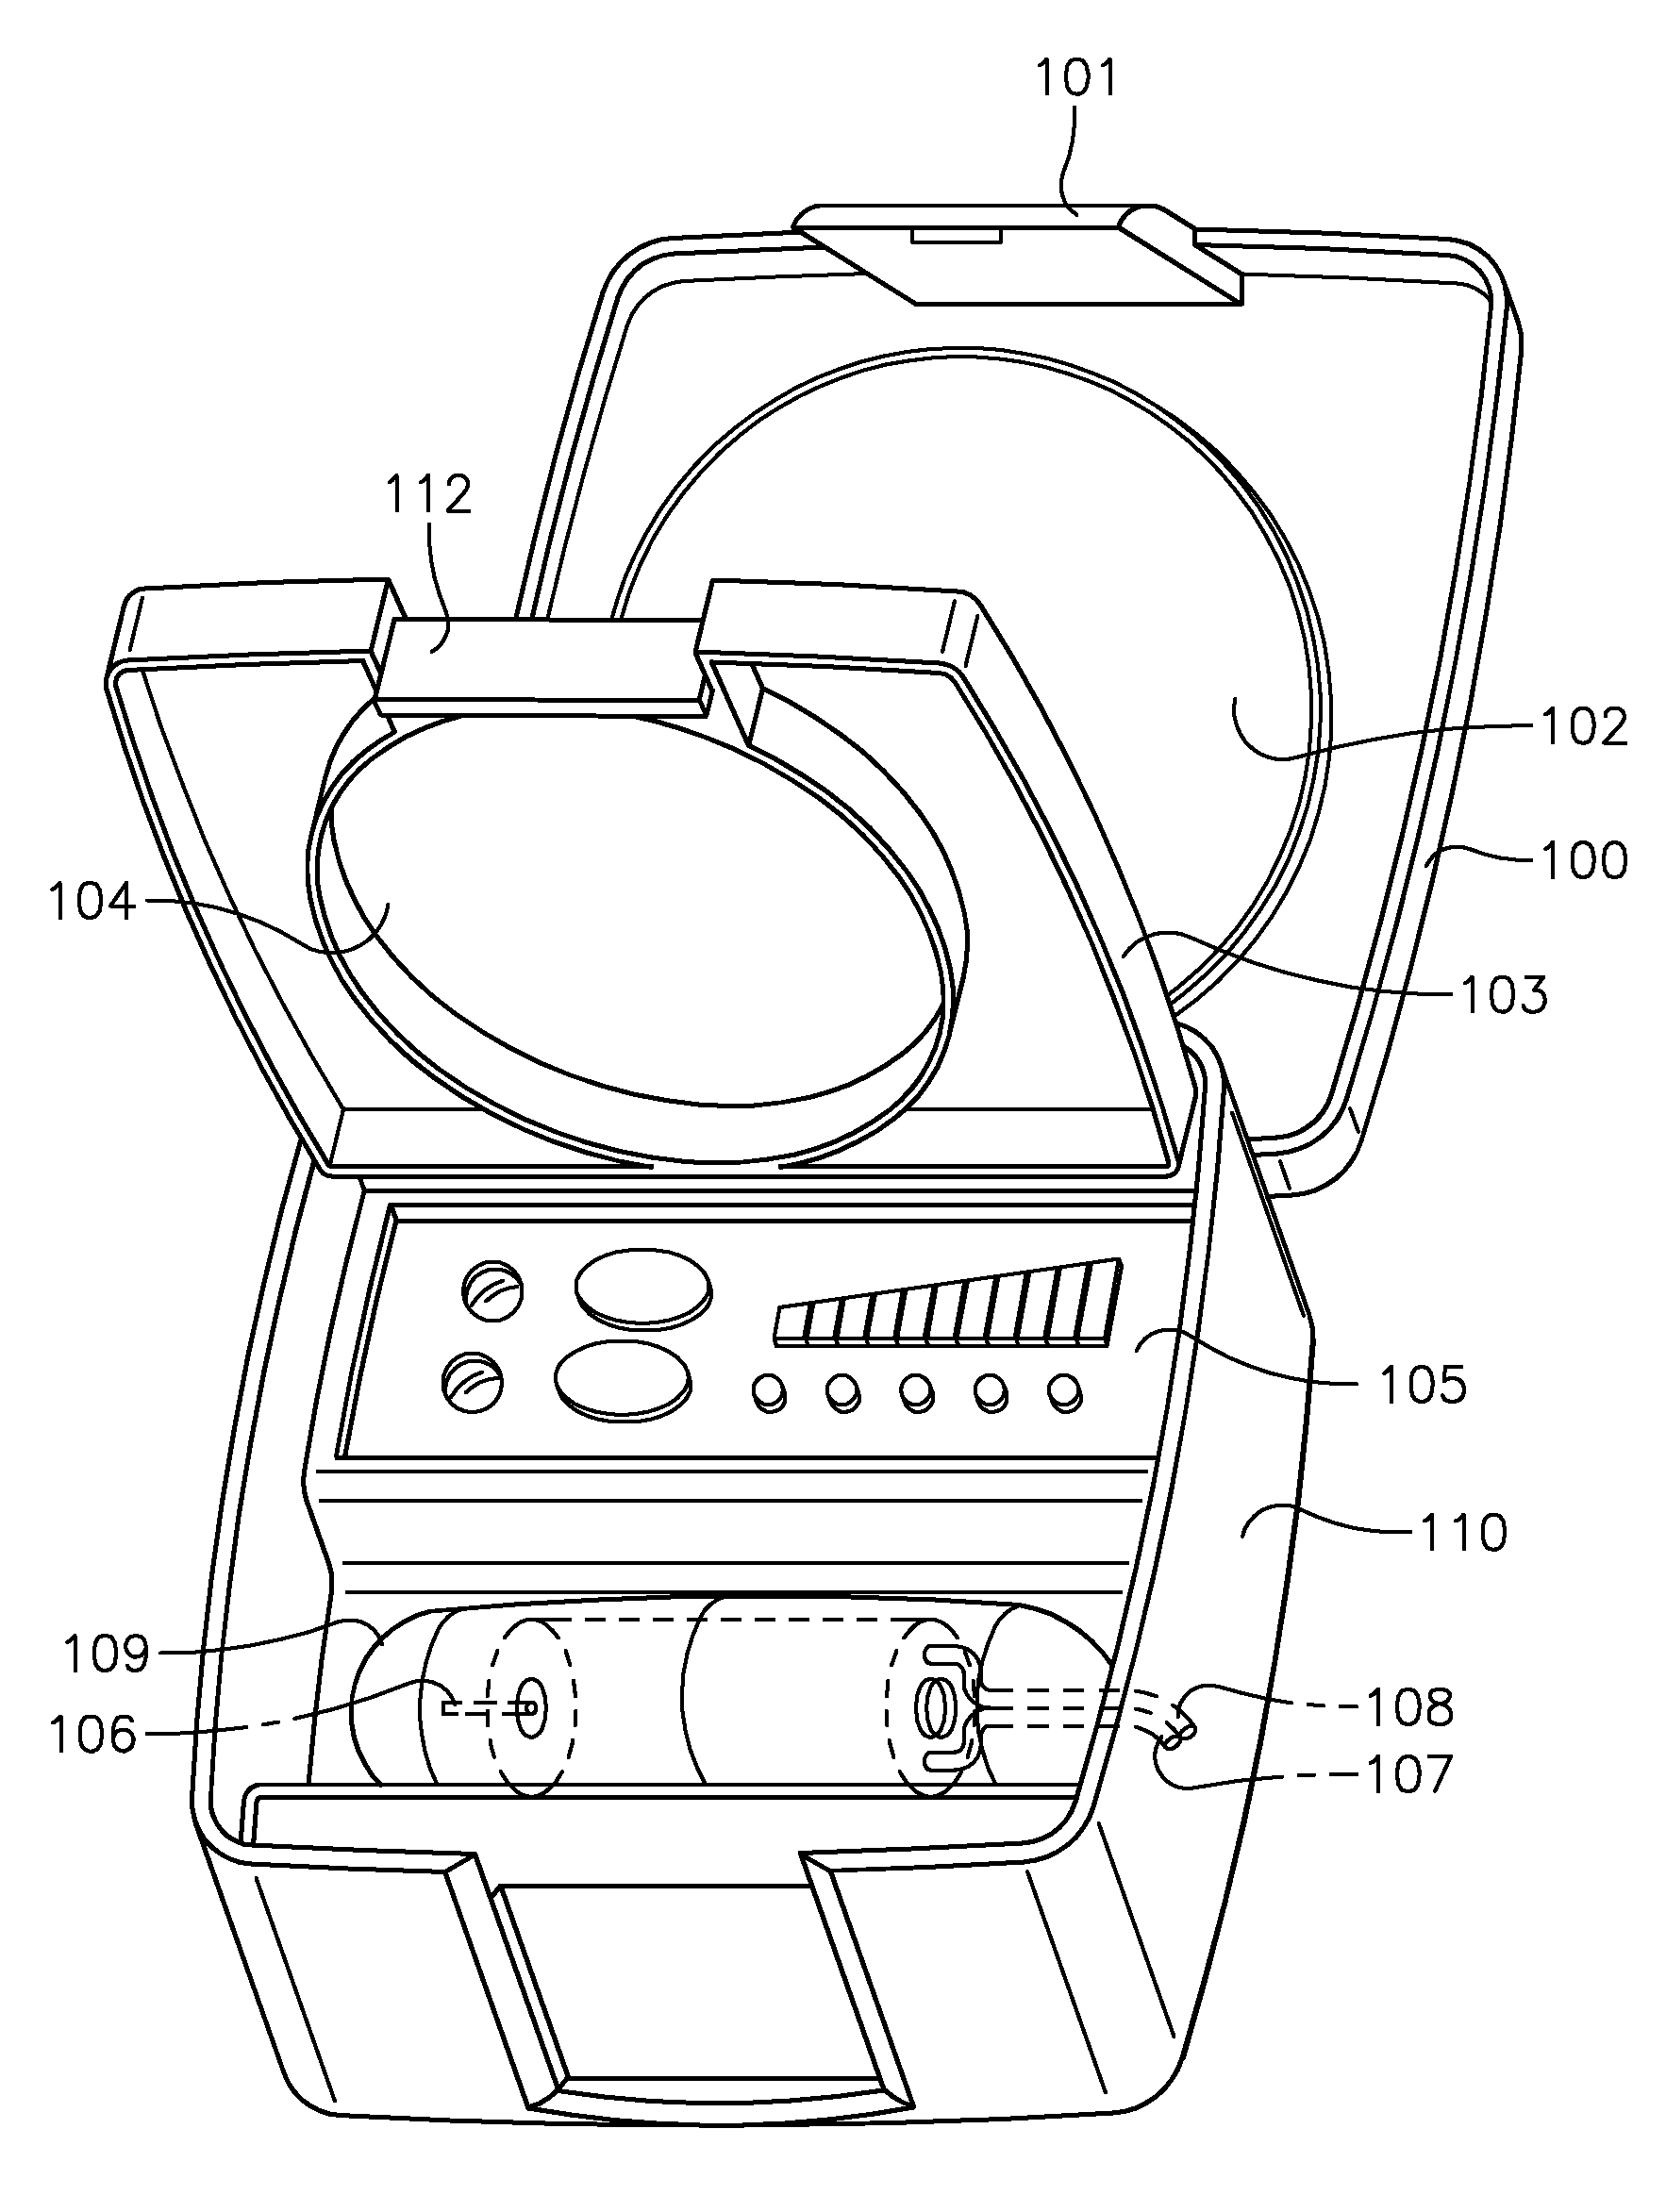 Dual-compartment, dual-function cosmetic container and therapeutic device